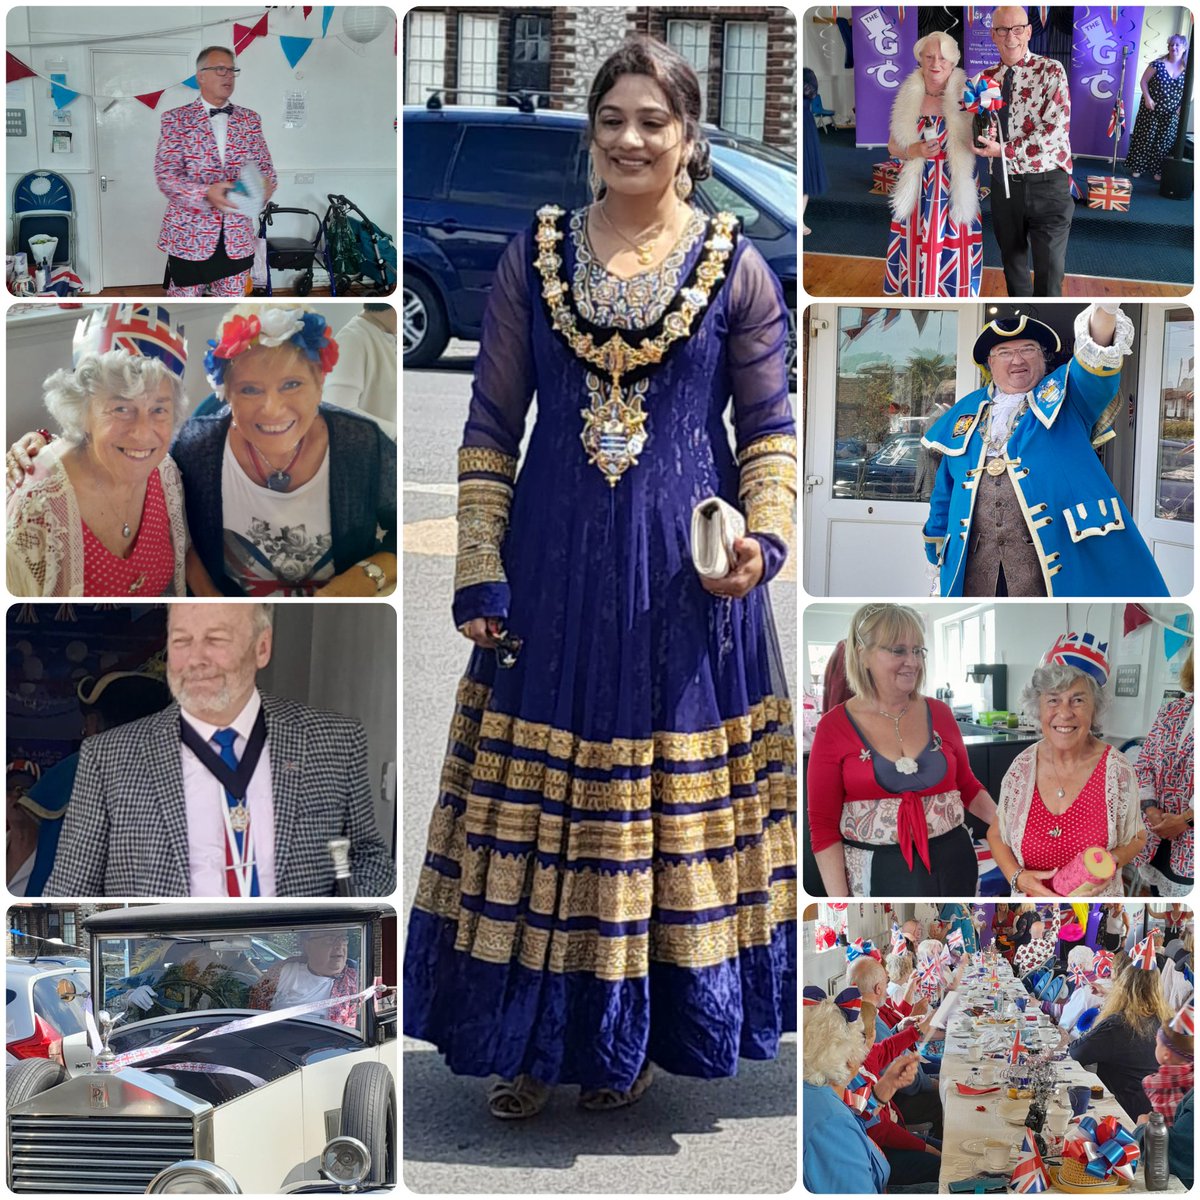 13 days to Loneliness Awareness Week. Worthings Great Night Out During the Day #PlatinumJubilee A round of TYs Worthing Mayor @HennaChowdhury @CoolTownCrier @Promedica24WS @CllrSMcDonald @EndLonelinessUK @coopuk #VolunteersWeek2022